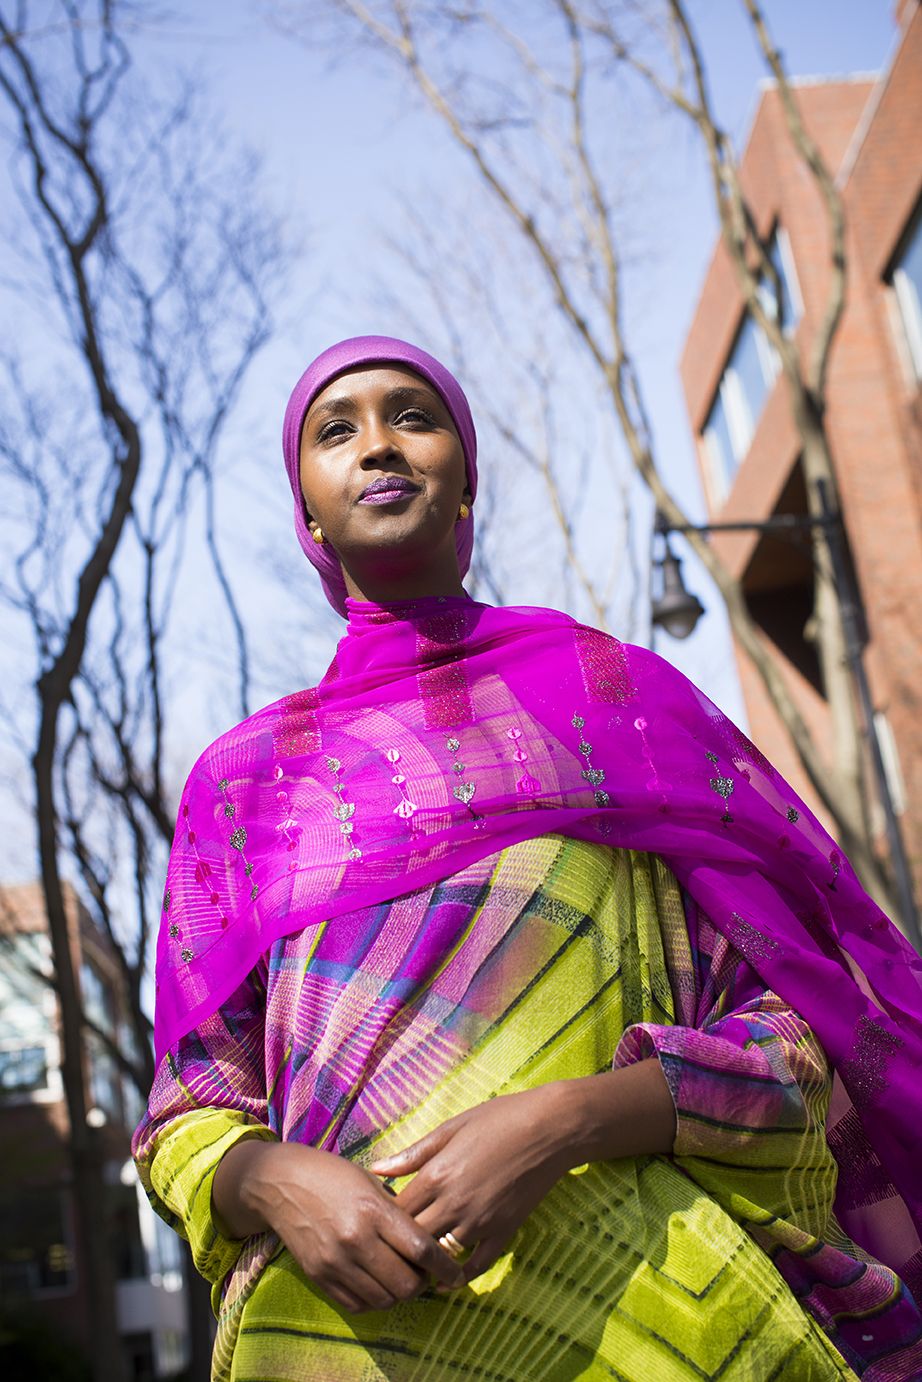 The Somali Woman Who Would be President.